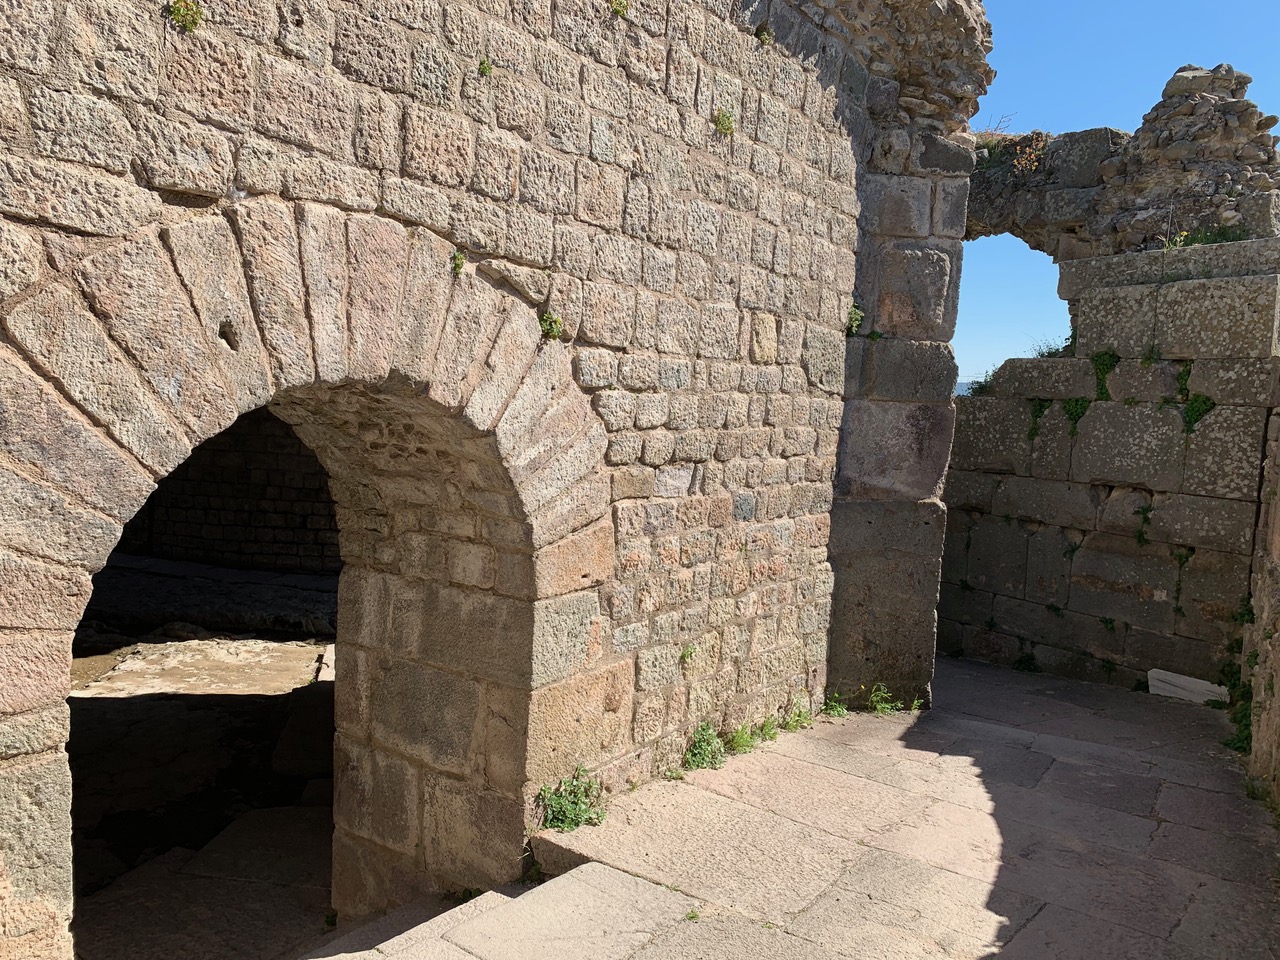 arched doorway in stone wall